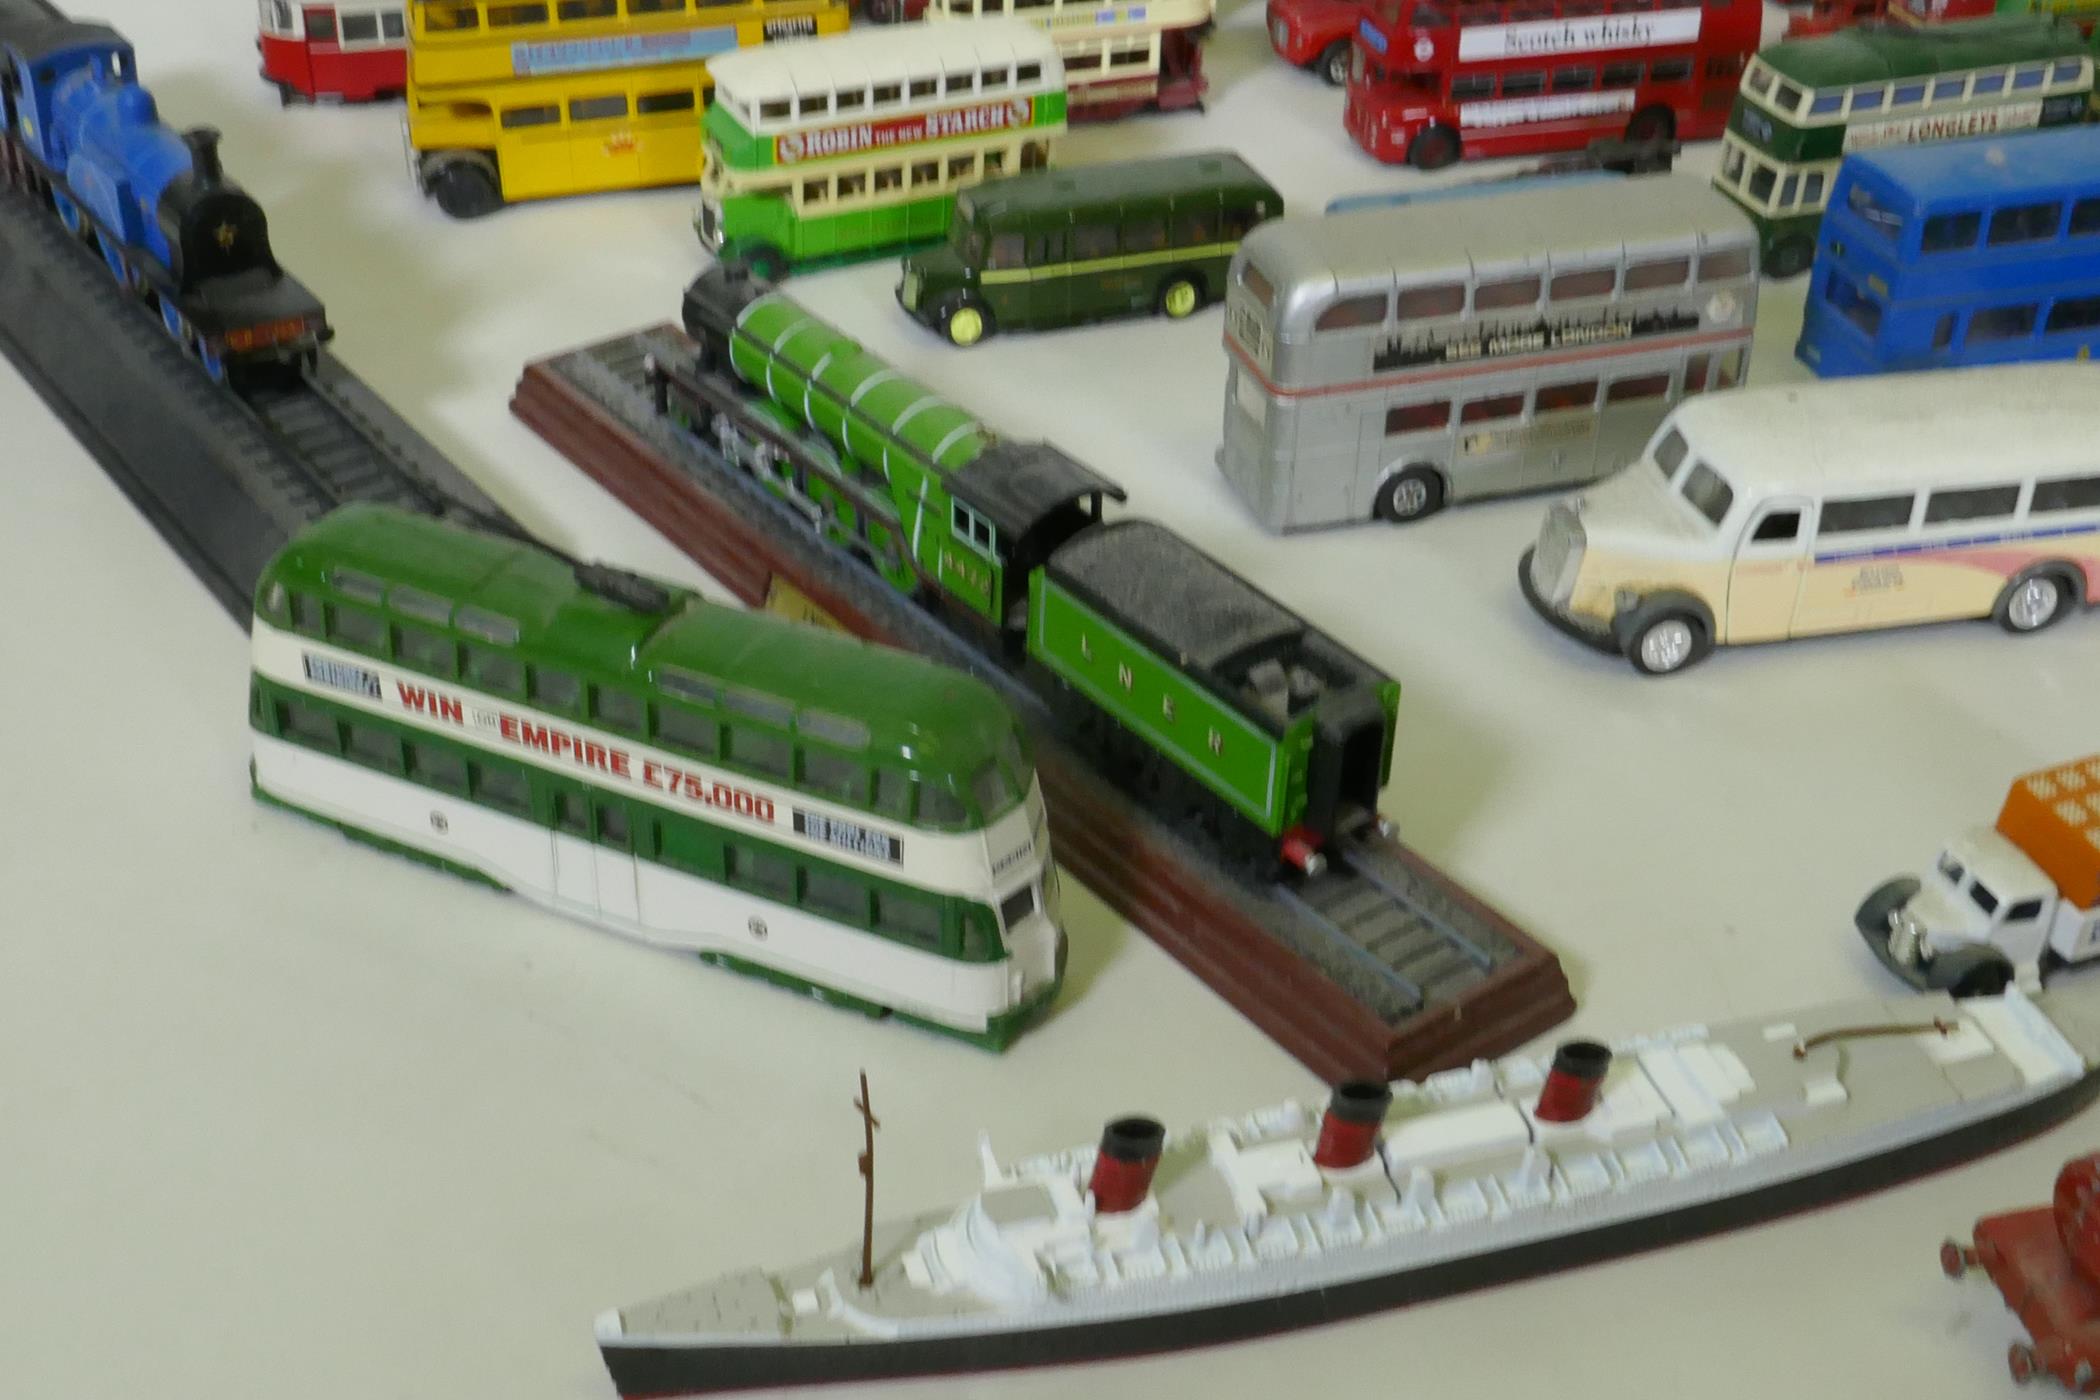 A quantity of collector's die cast model buses, trains, ships etc - Image 4 of 7